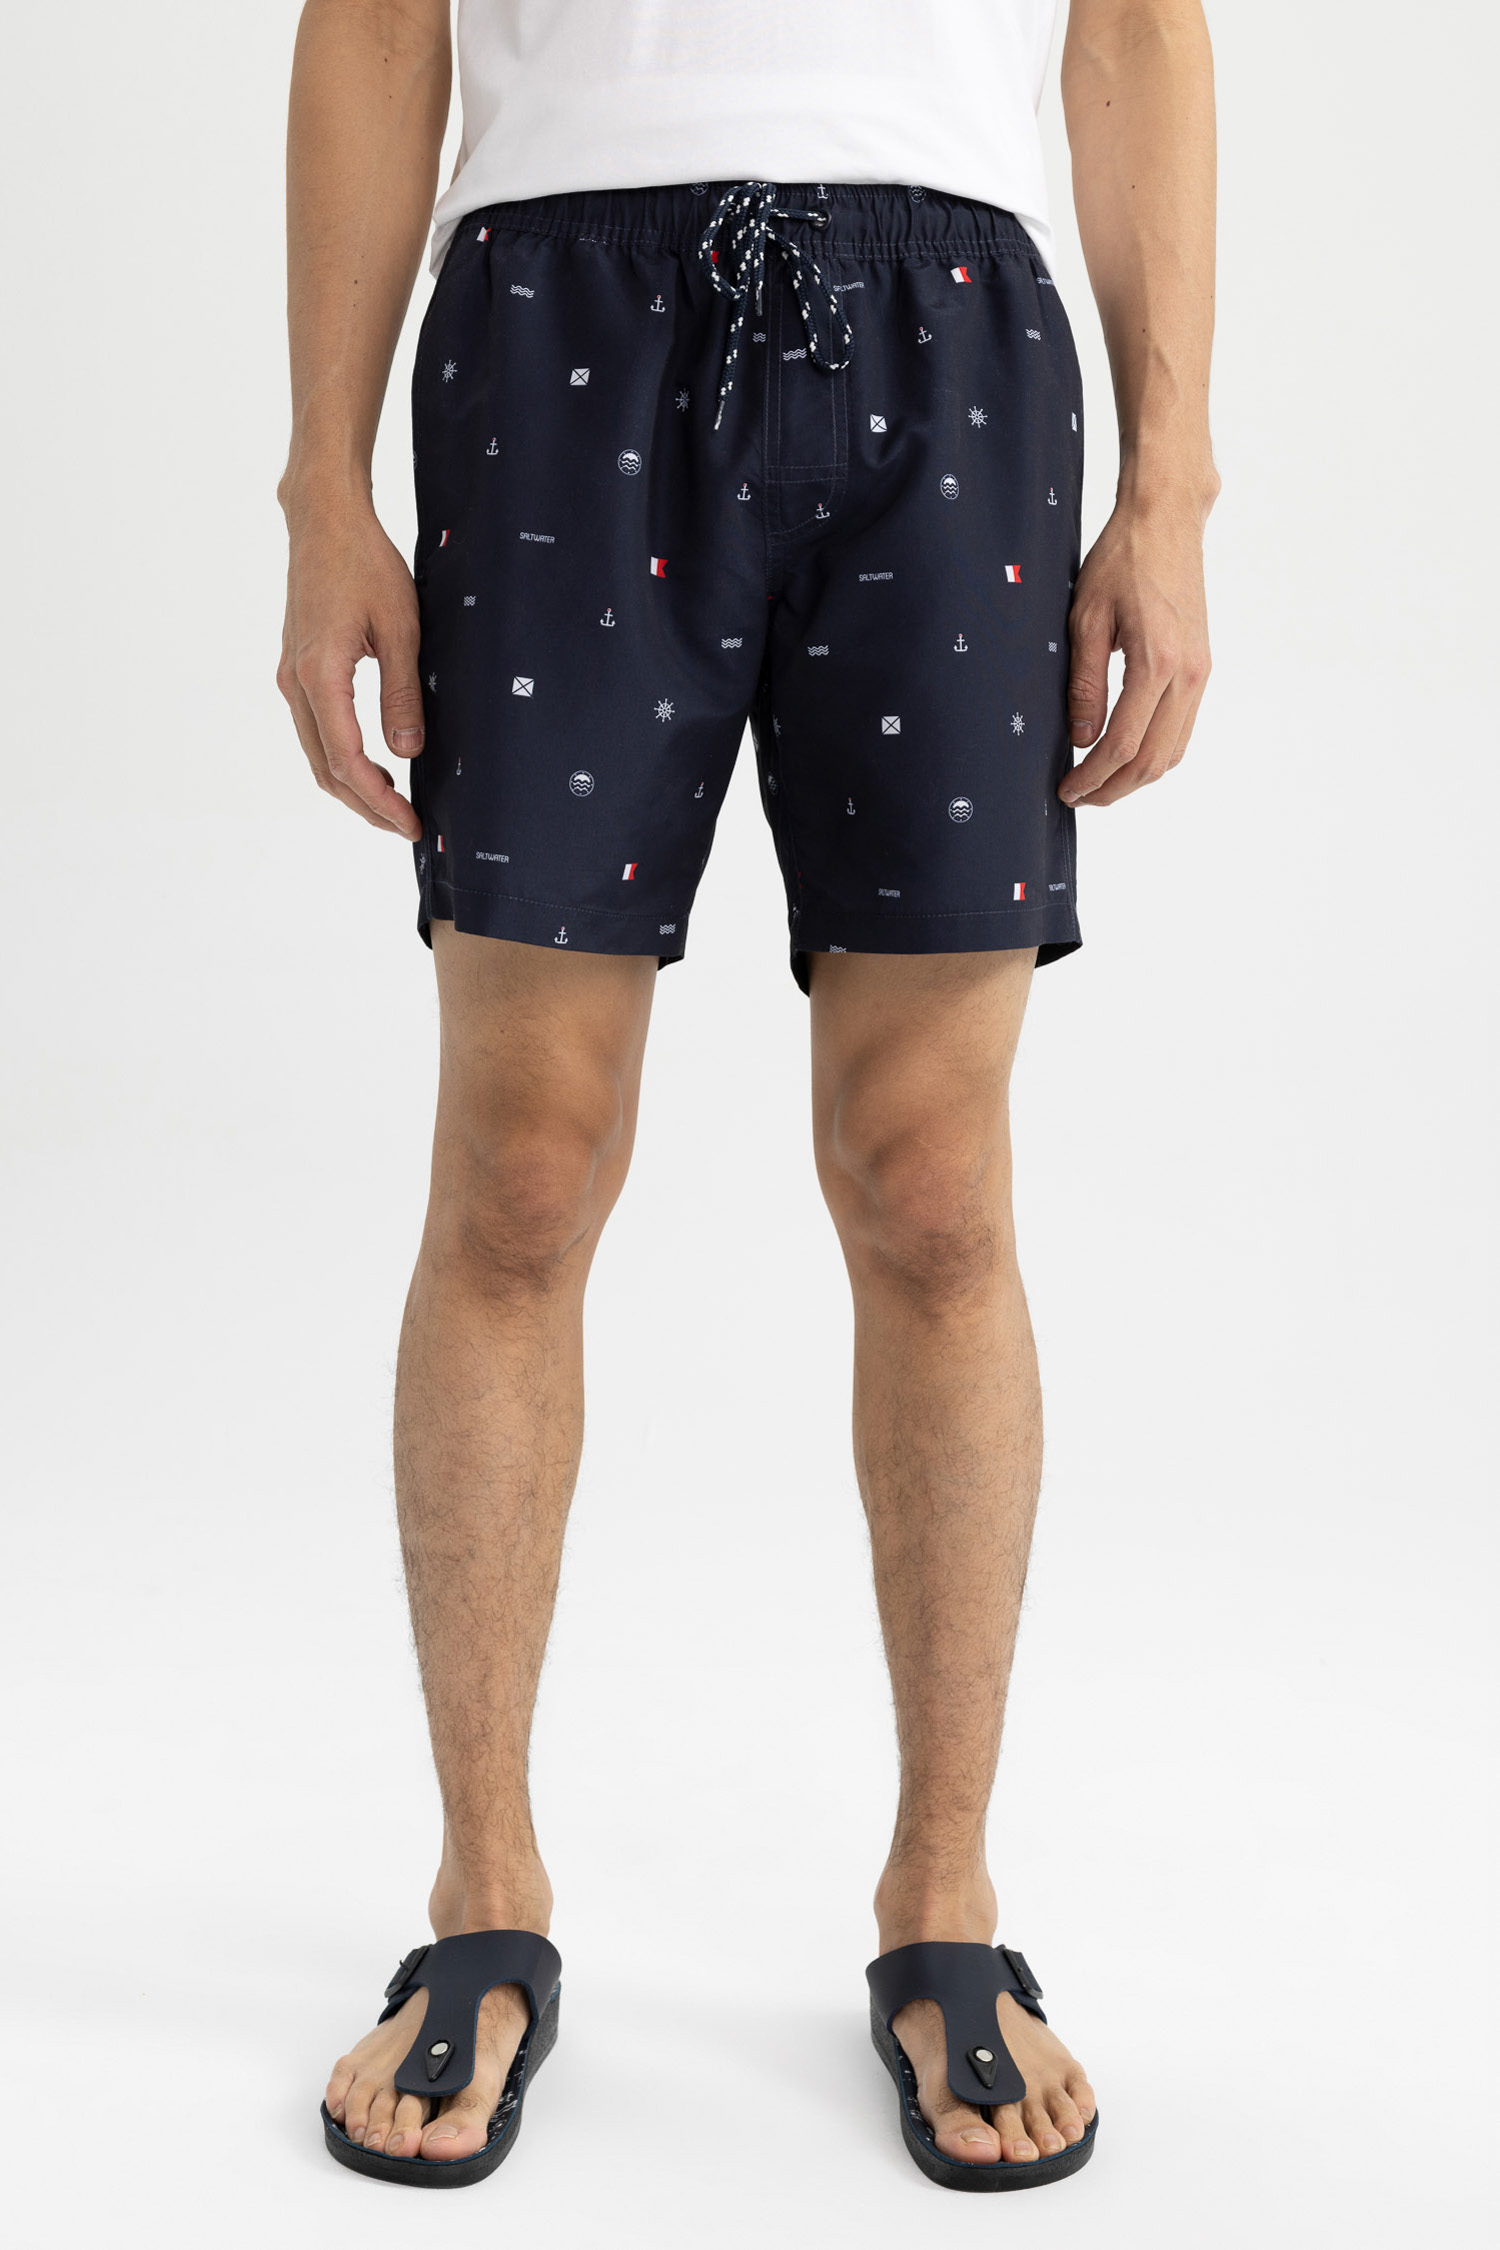 DeFacto Regular Fit Above Knee Swimming Shorts